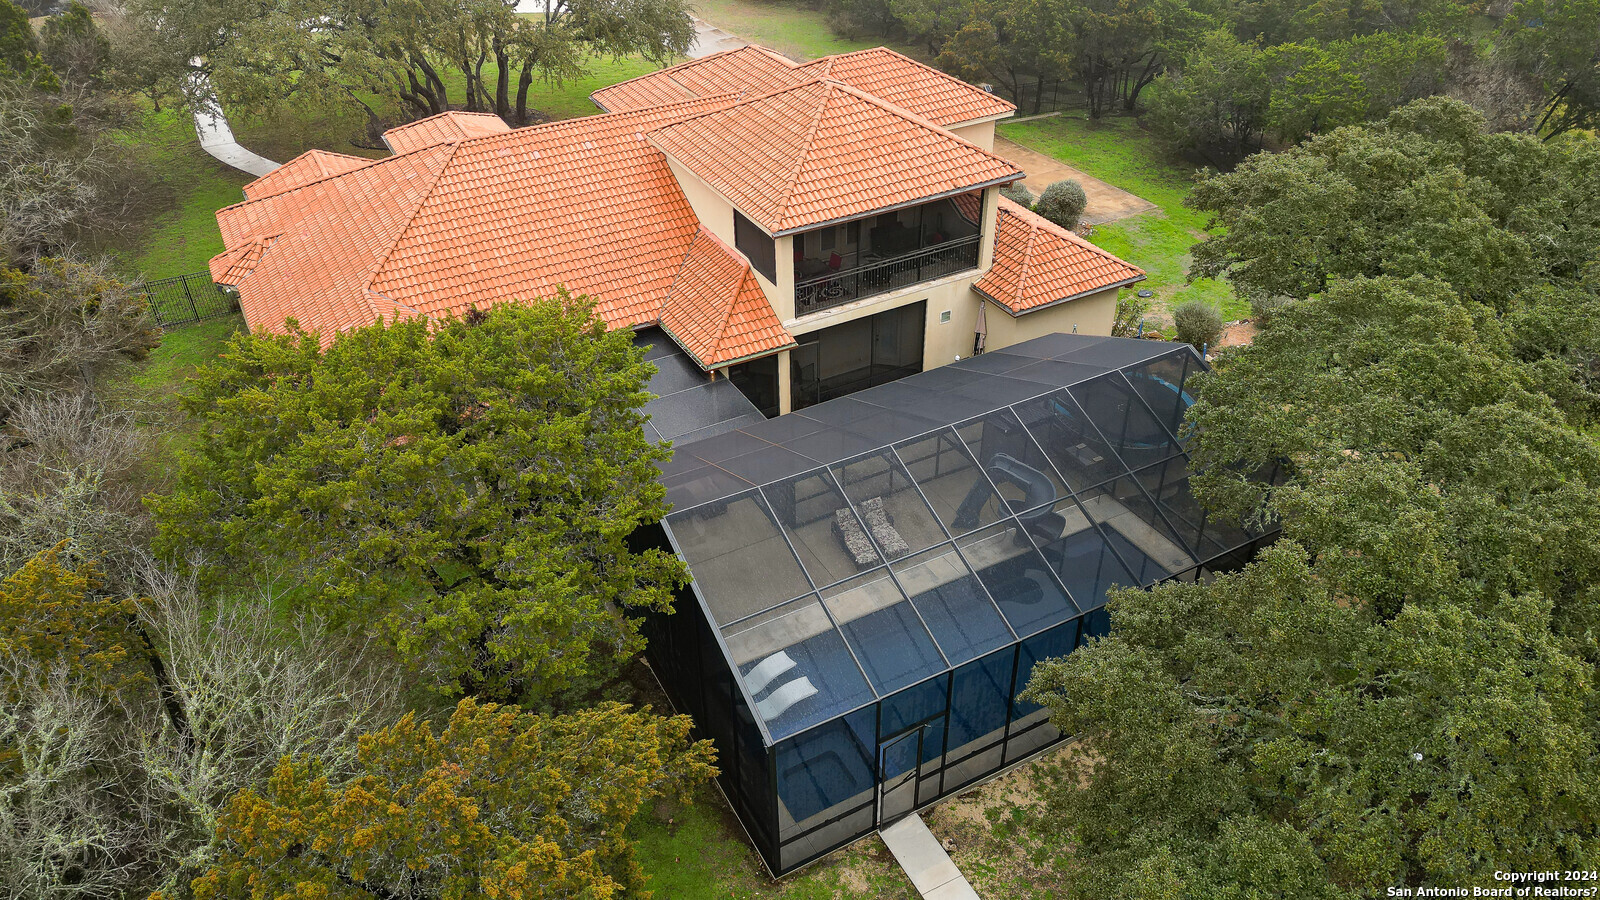 a aerial view of a house with a yard and large trees